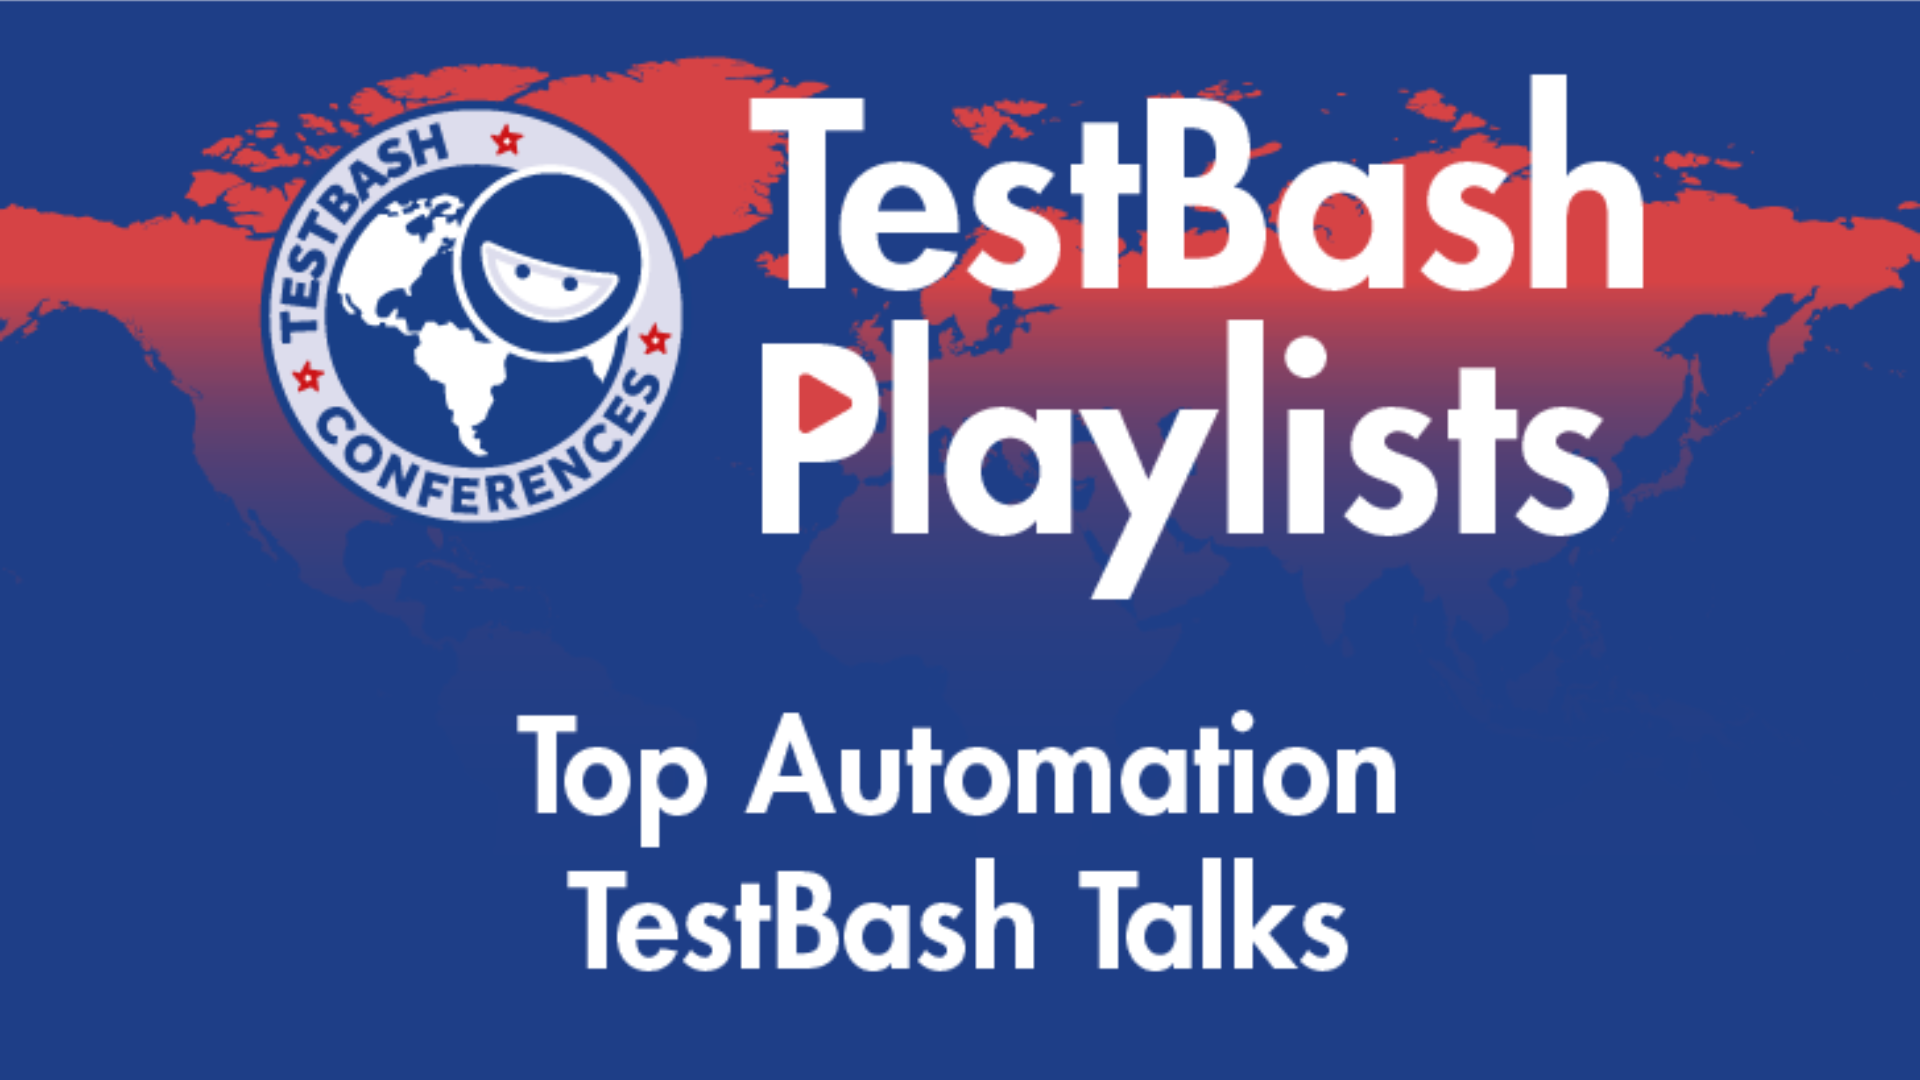 Top Automation Talks From TestBash